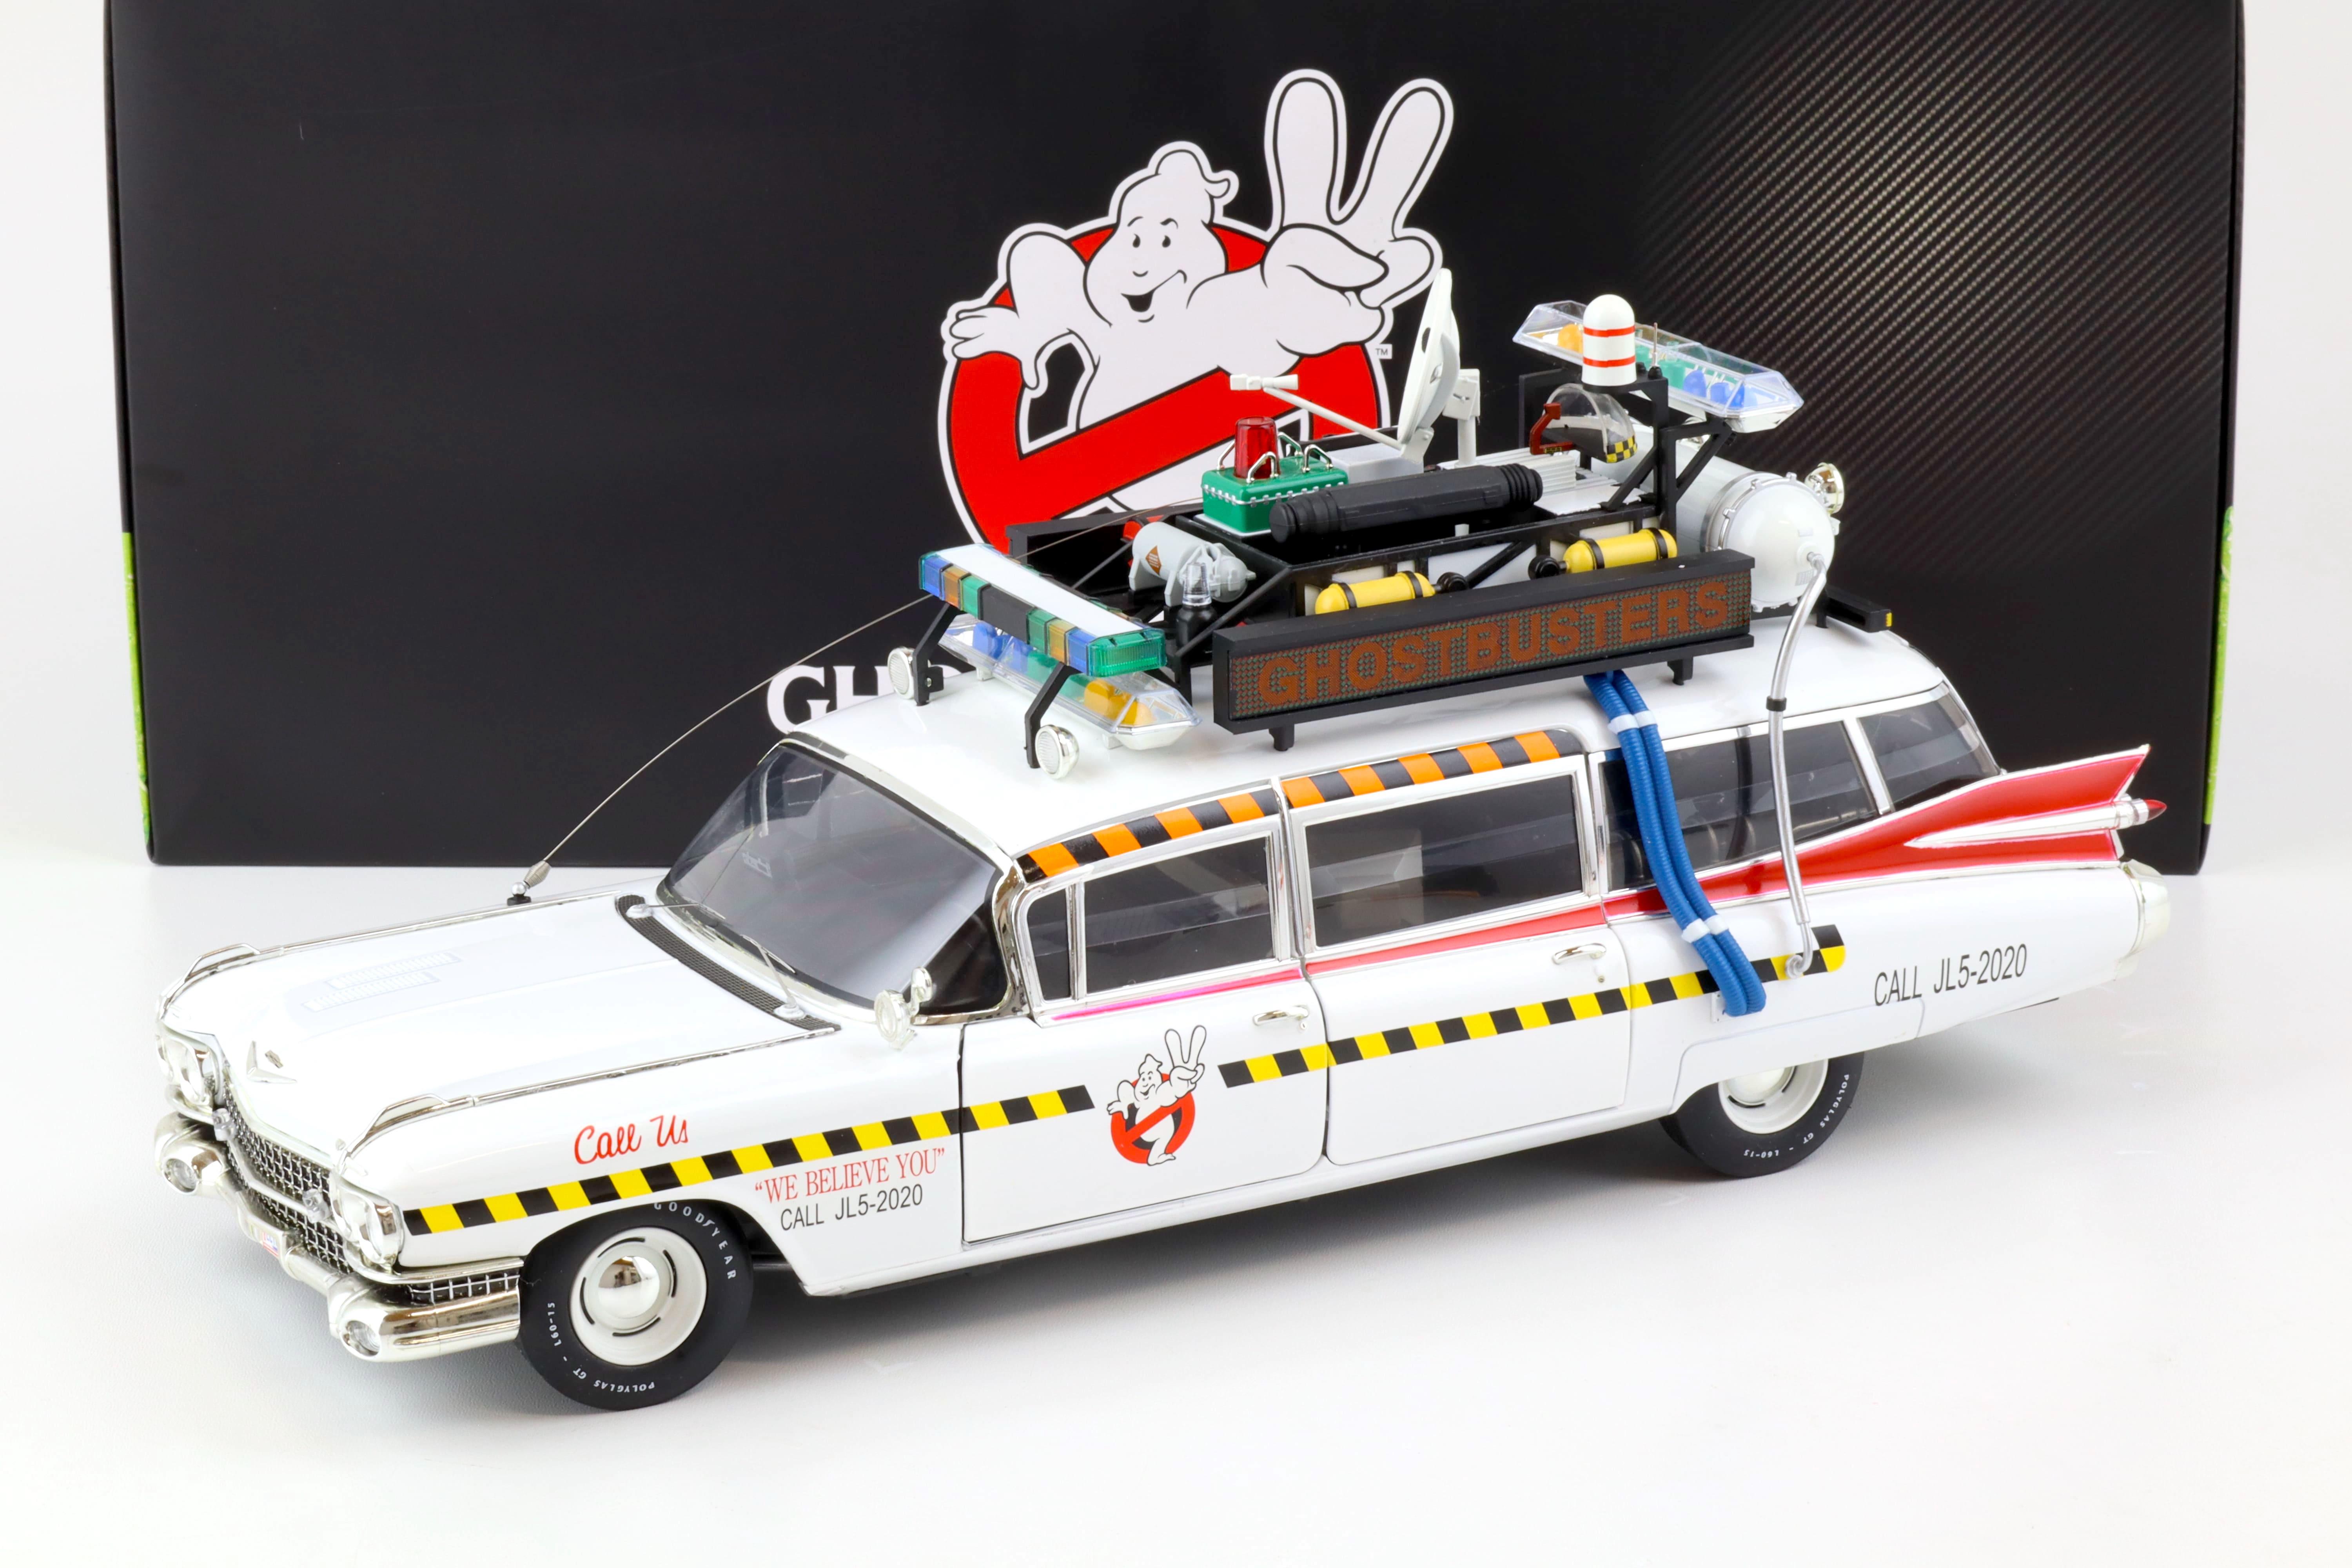 1:18 Hot Wheels Elite 1959 Cadillac Miller GHOSTBUSTERS ECTO 1A white X5470